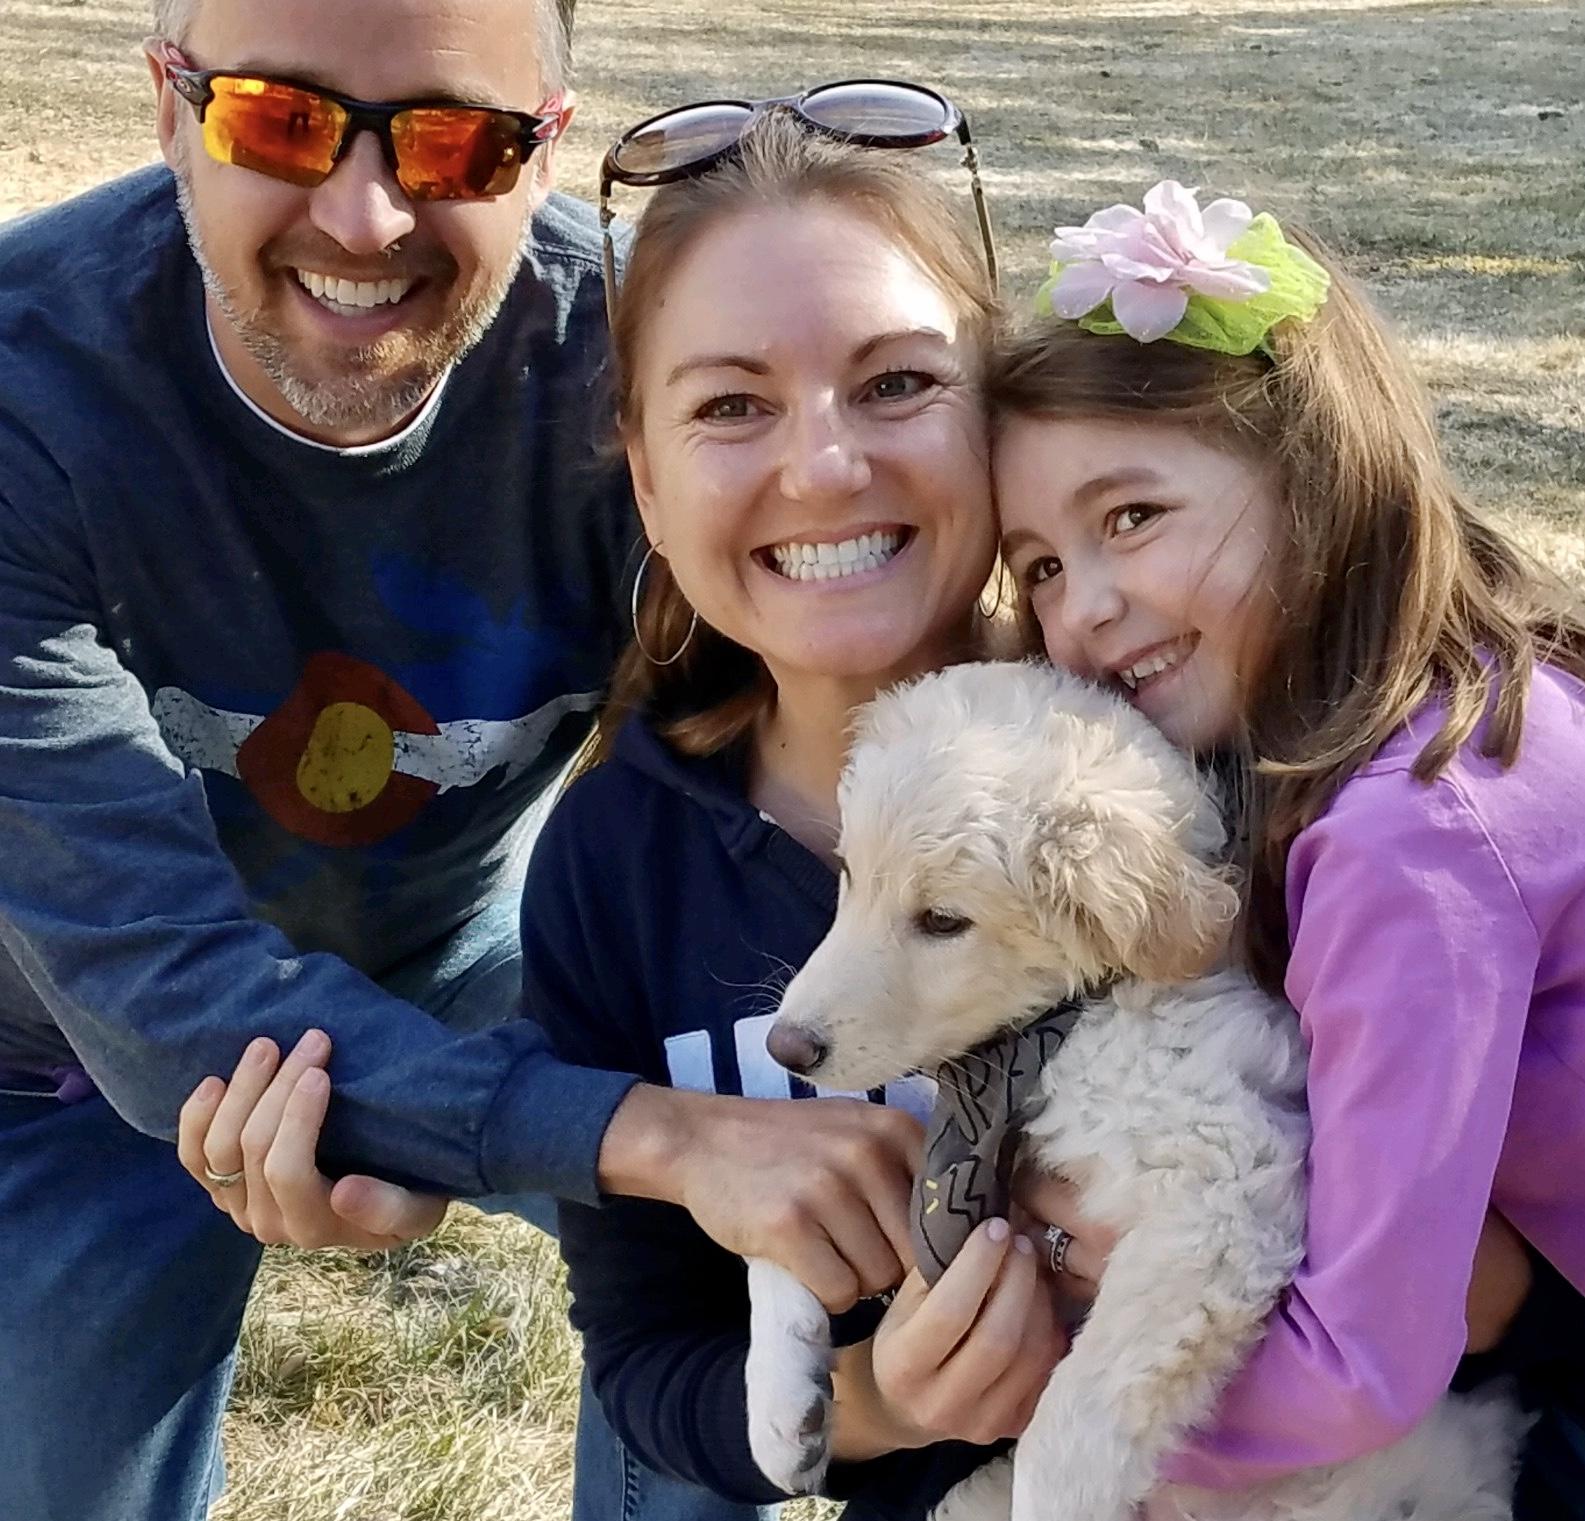 Dr. Brittany Seymour and her family spend time with their new dog amid the coronavirus outbreak.